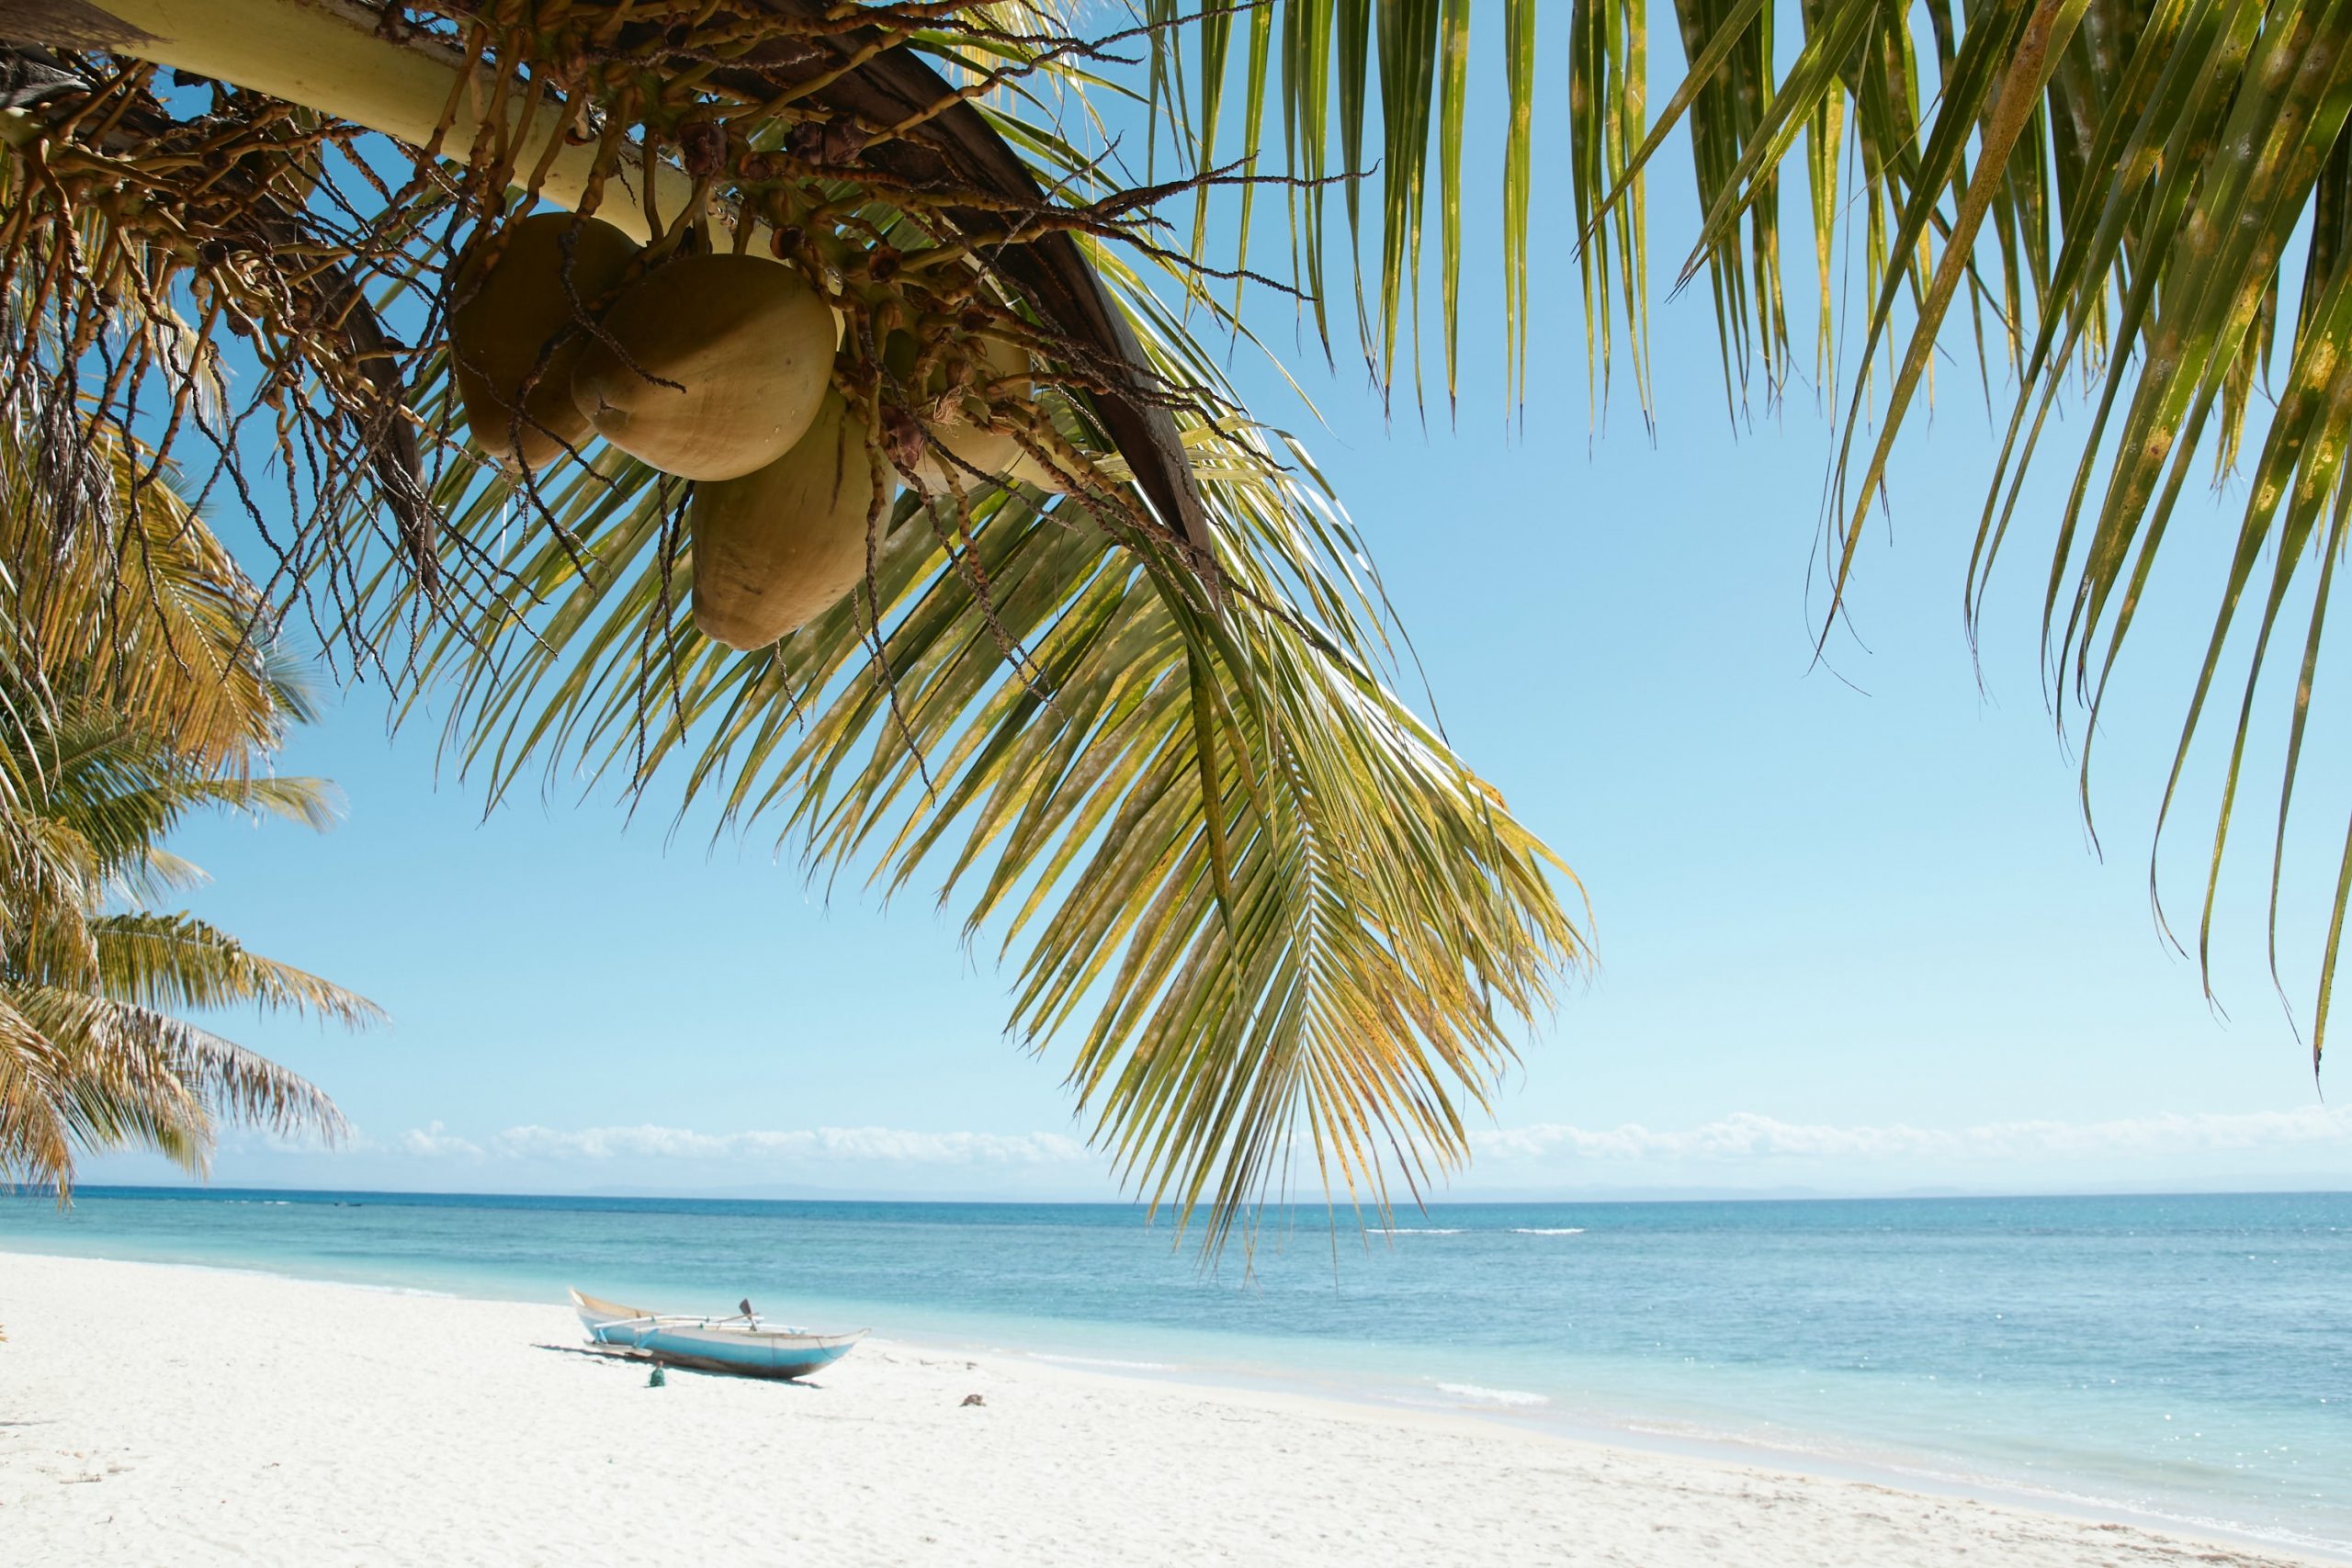 A lone boat lies unattended on the sandy beach of Madagascar with the branches of a coconut palm tree hanging overhead.